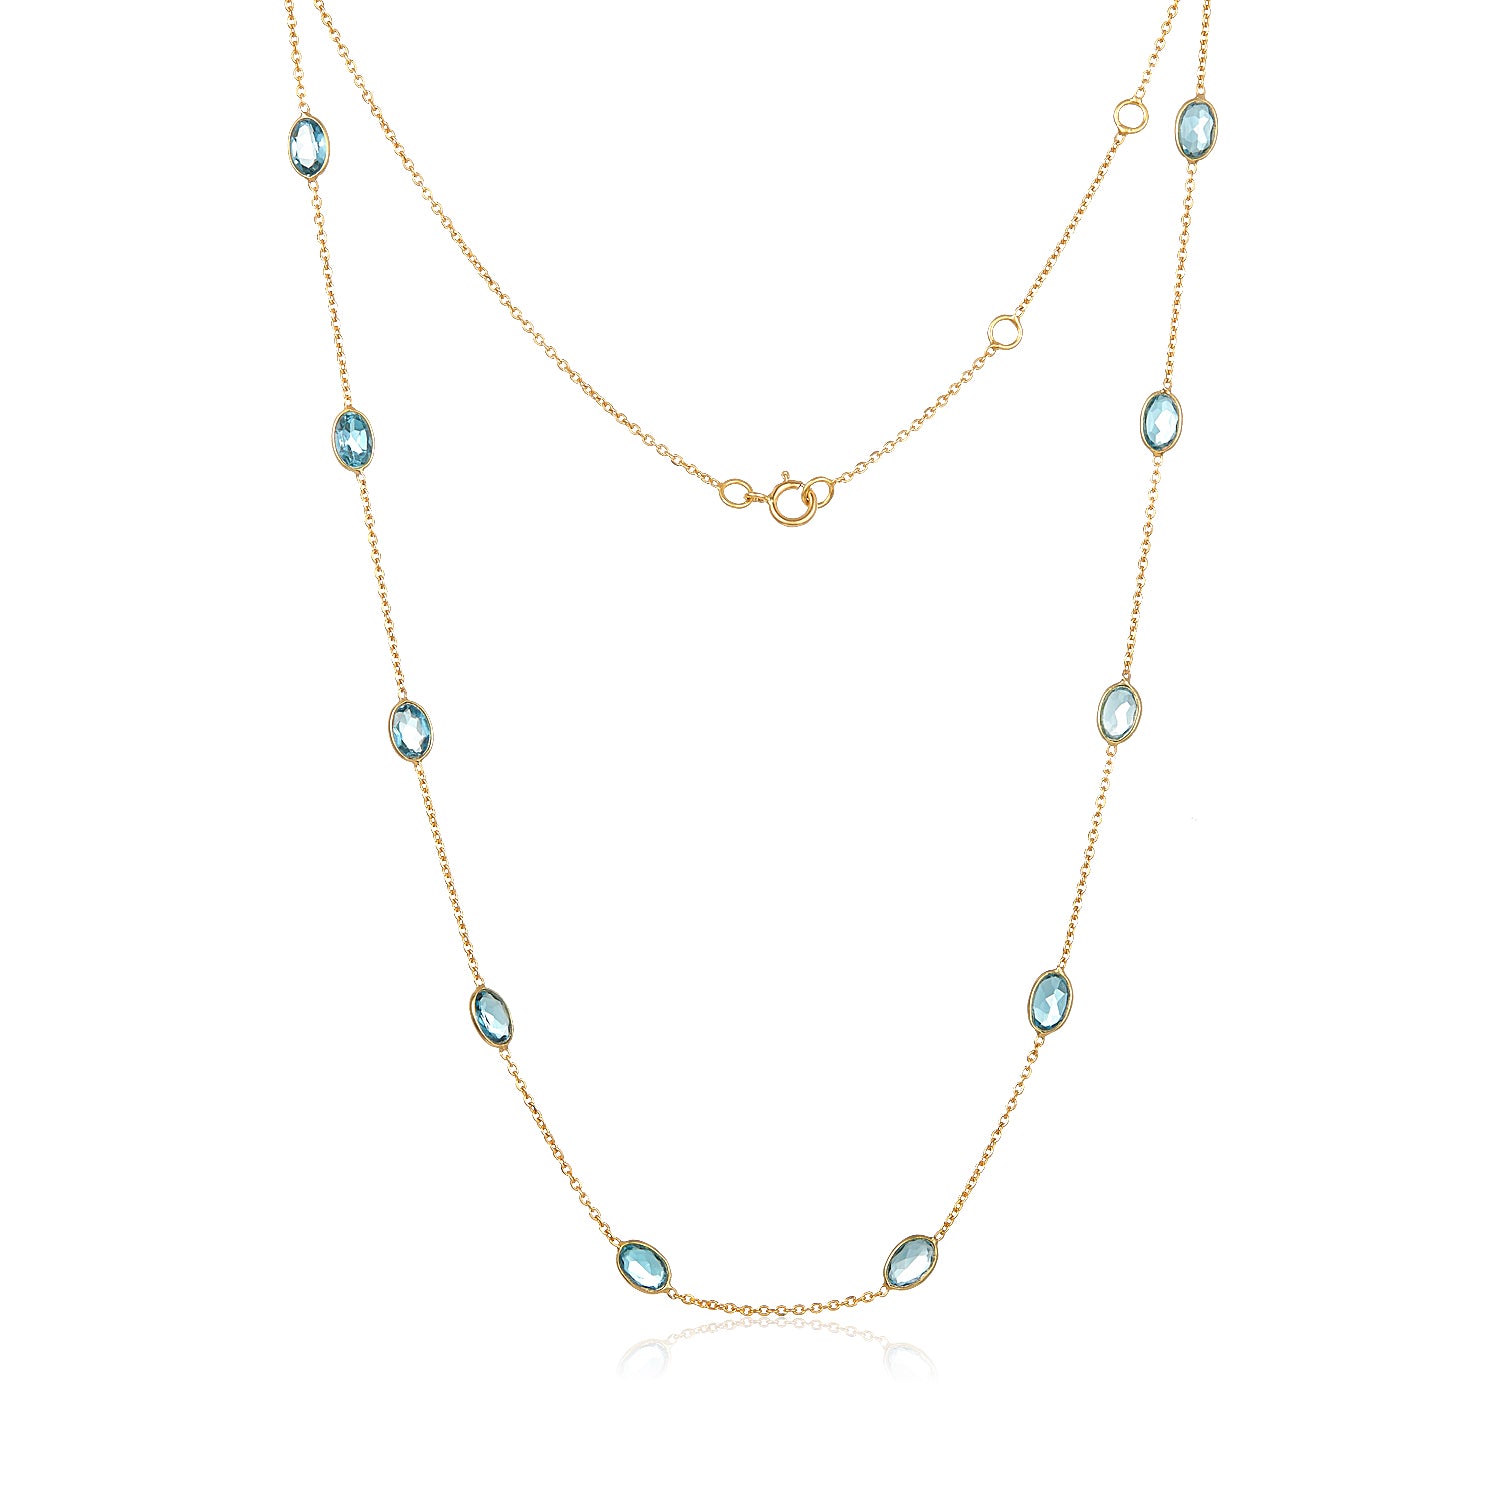 Blue Topaz Section Necklace in 18k